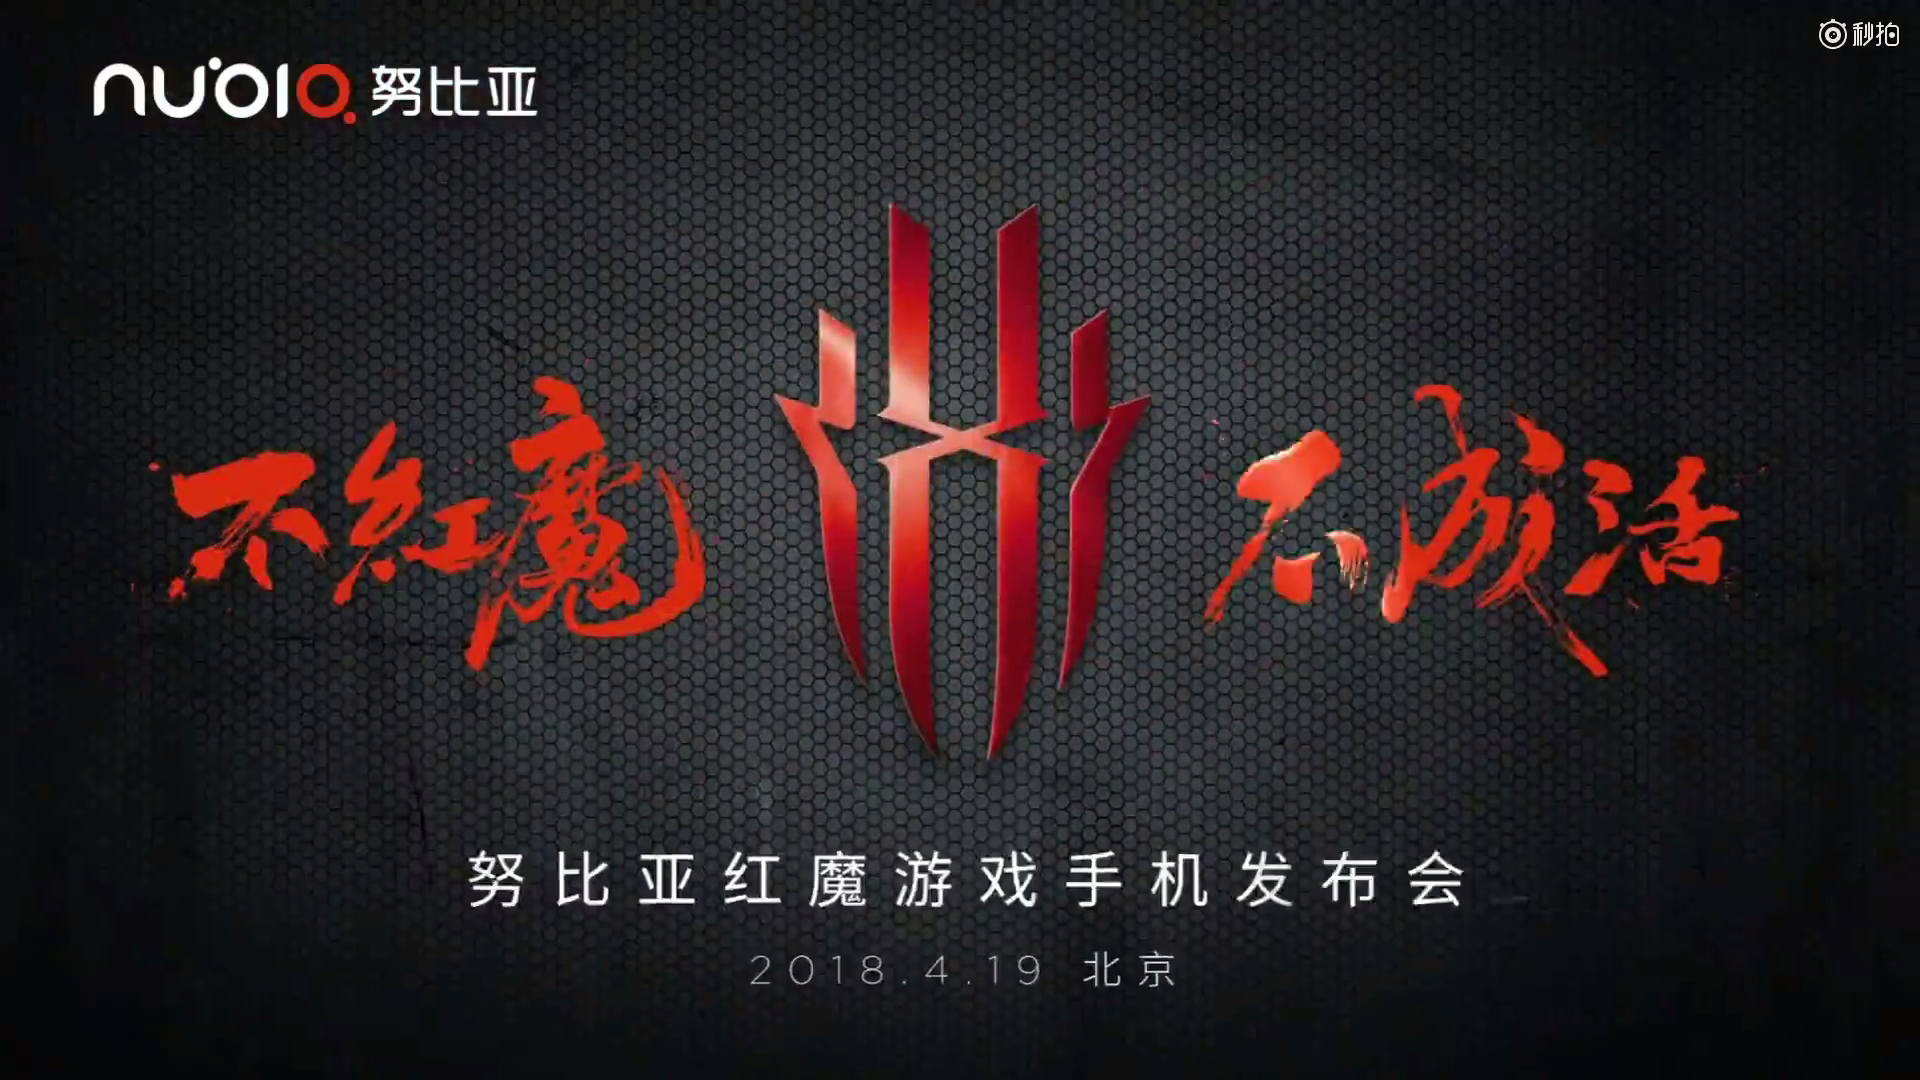 Teaser hints Nubia Red Magic gaming smartphone launch on April 19 3